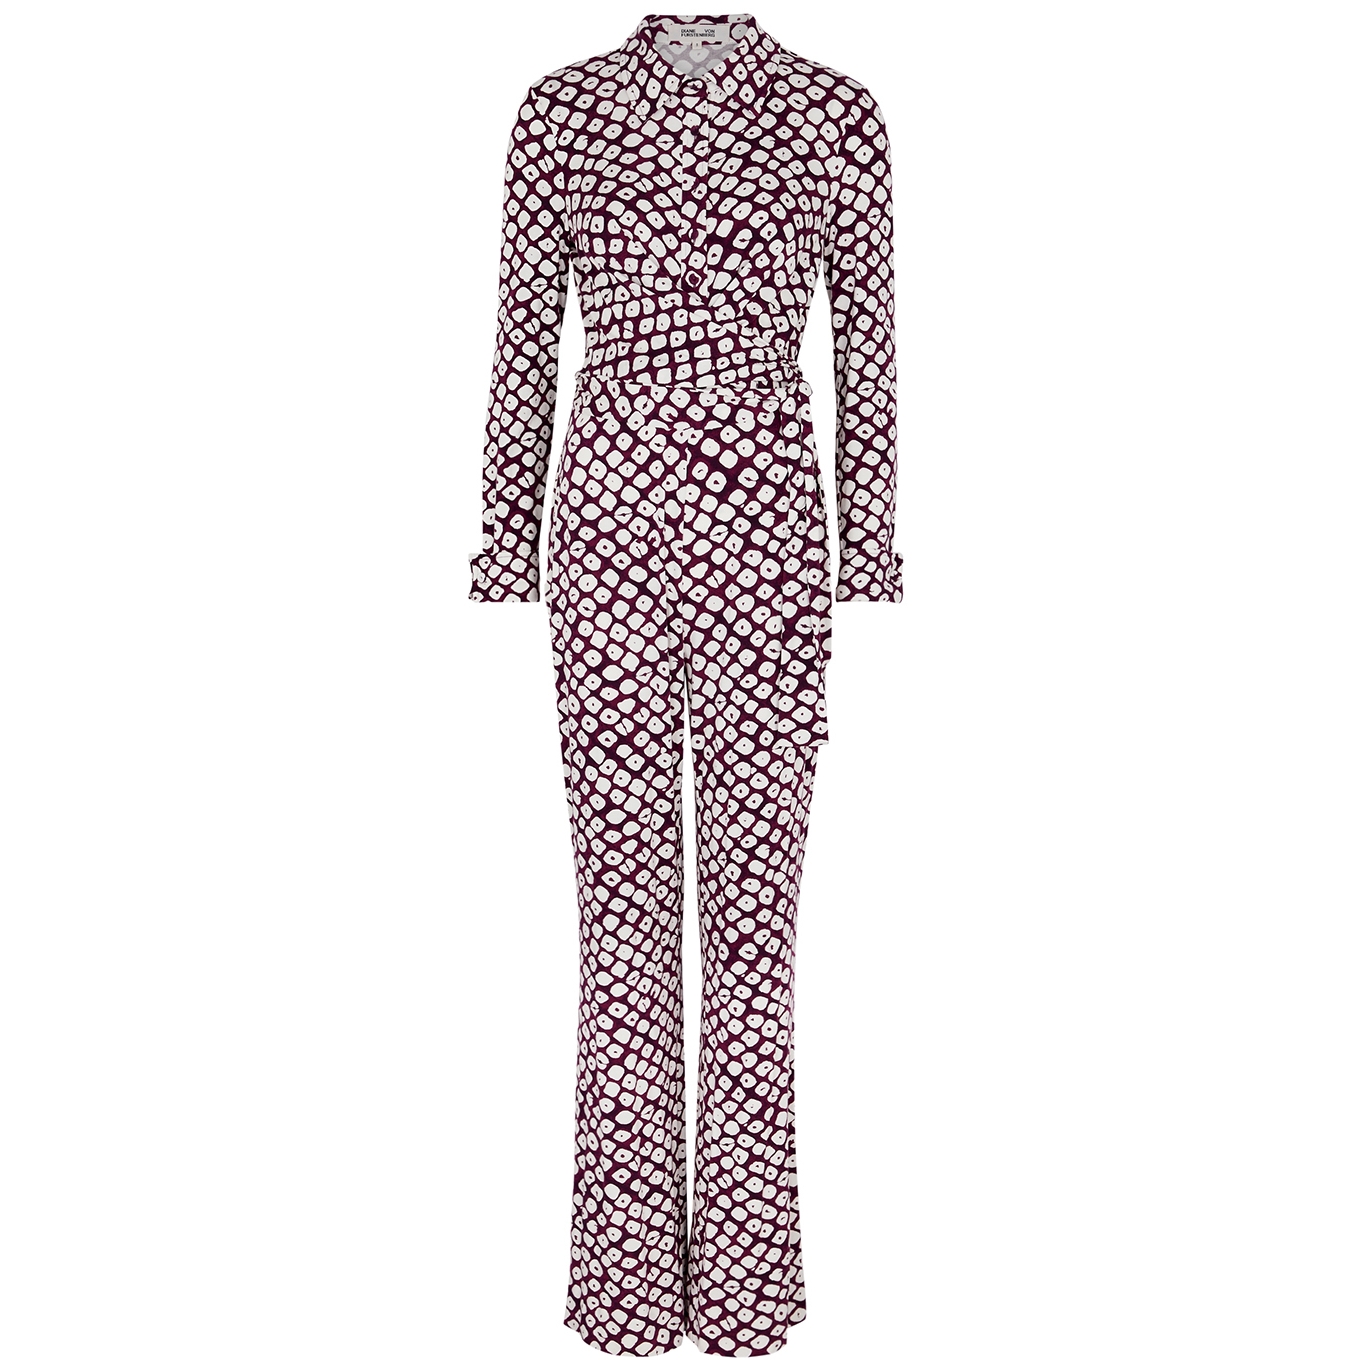 DIANE VON FURSTENBERG DIANE VON FURSTENBERG MICHELE PRINTED JERSEY JUMPSUIT